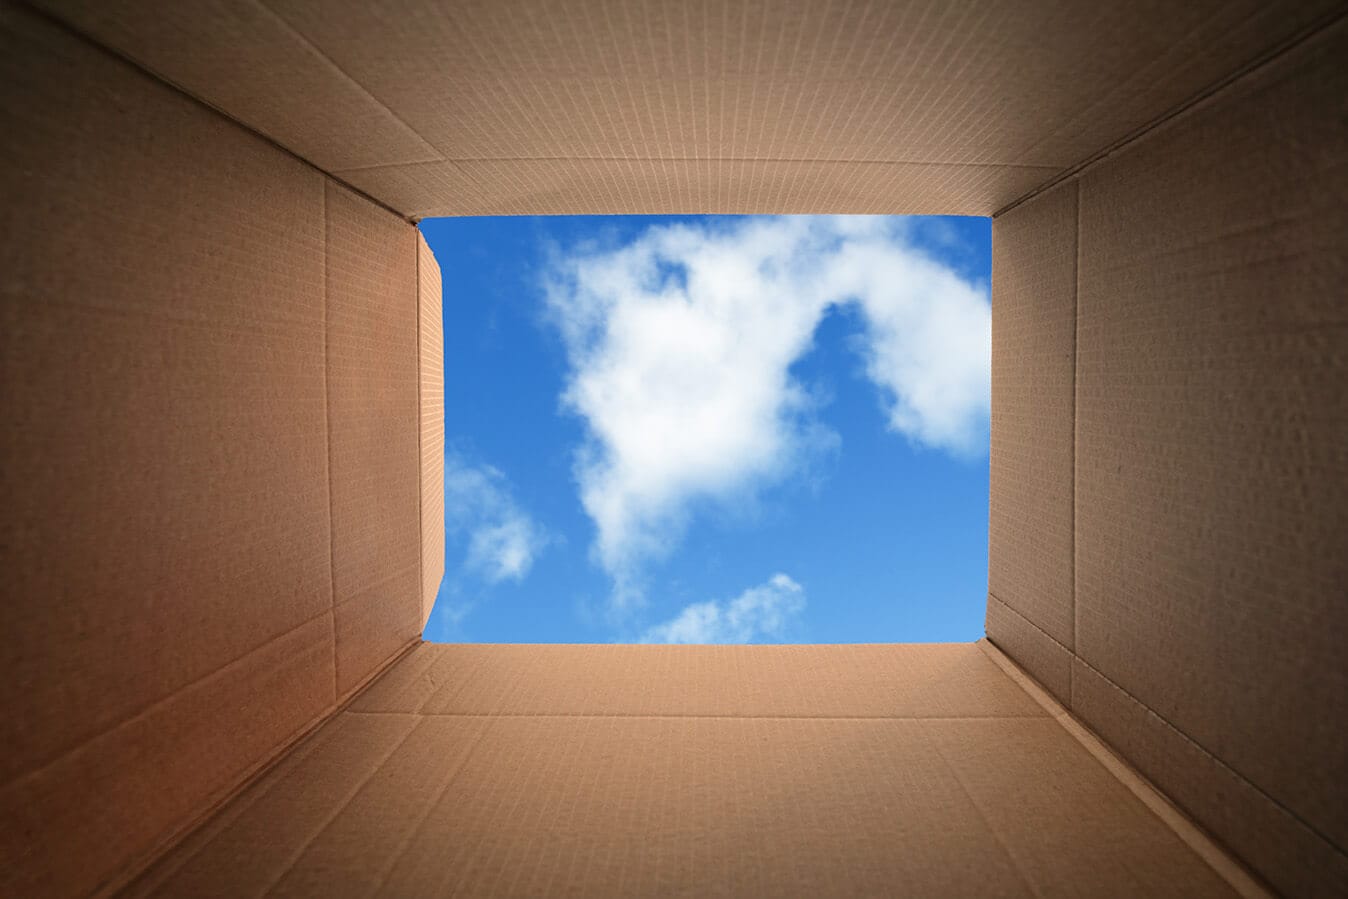 View from inside a cardboard box looking up at sky